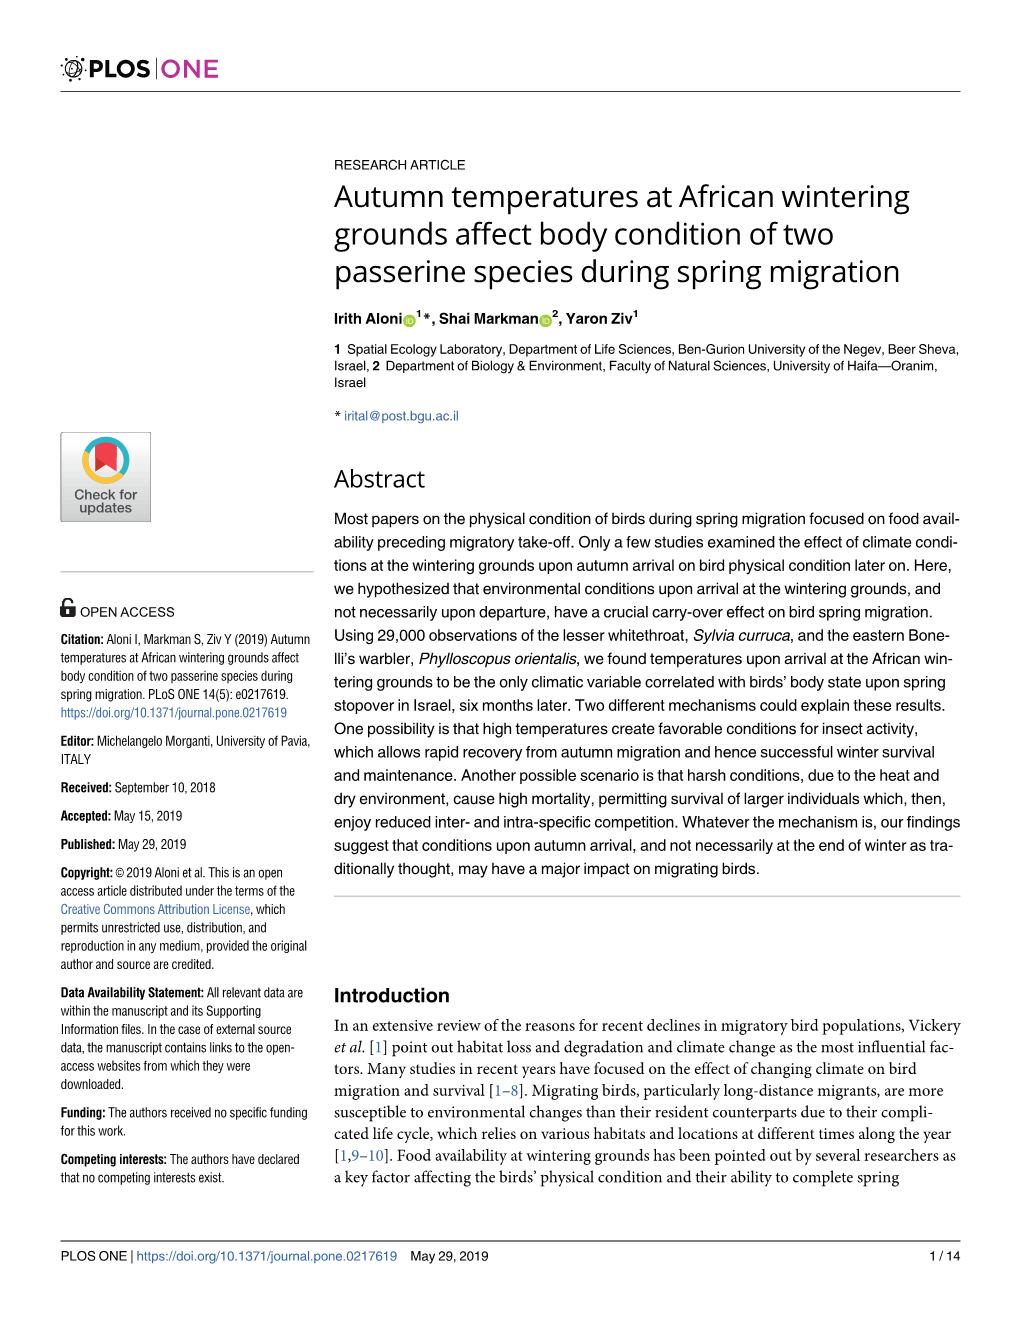 Autumn Temperatures at African Wintering Grounds Affect Body Condition of Two Passerine Species During Spring Migration